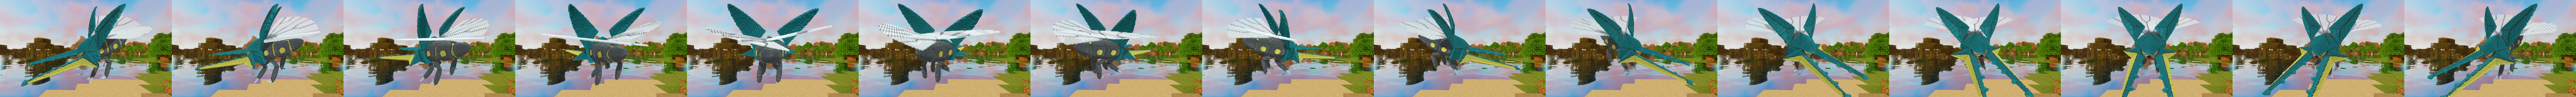 Minecraft Genesect Build Schematic - 3D model by inostupid (@inostupid)  [e7af8b8]